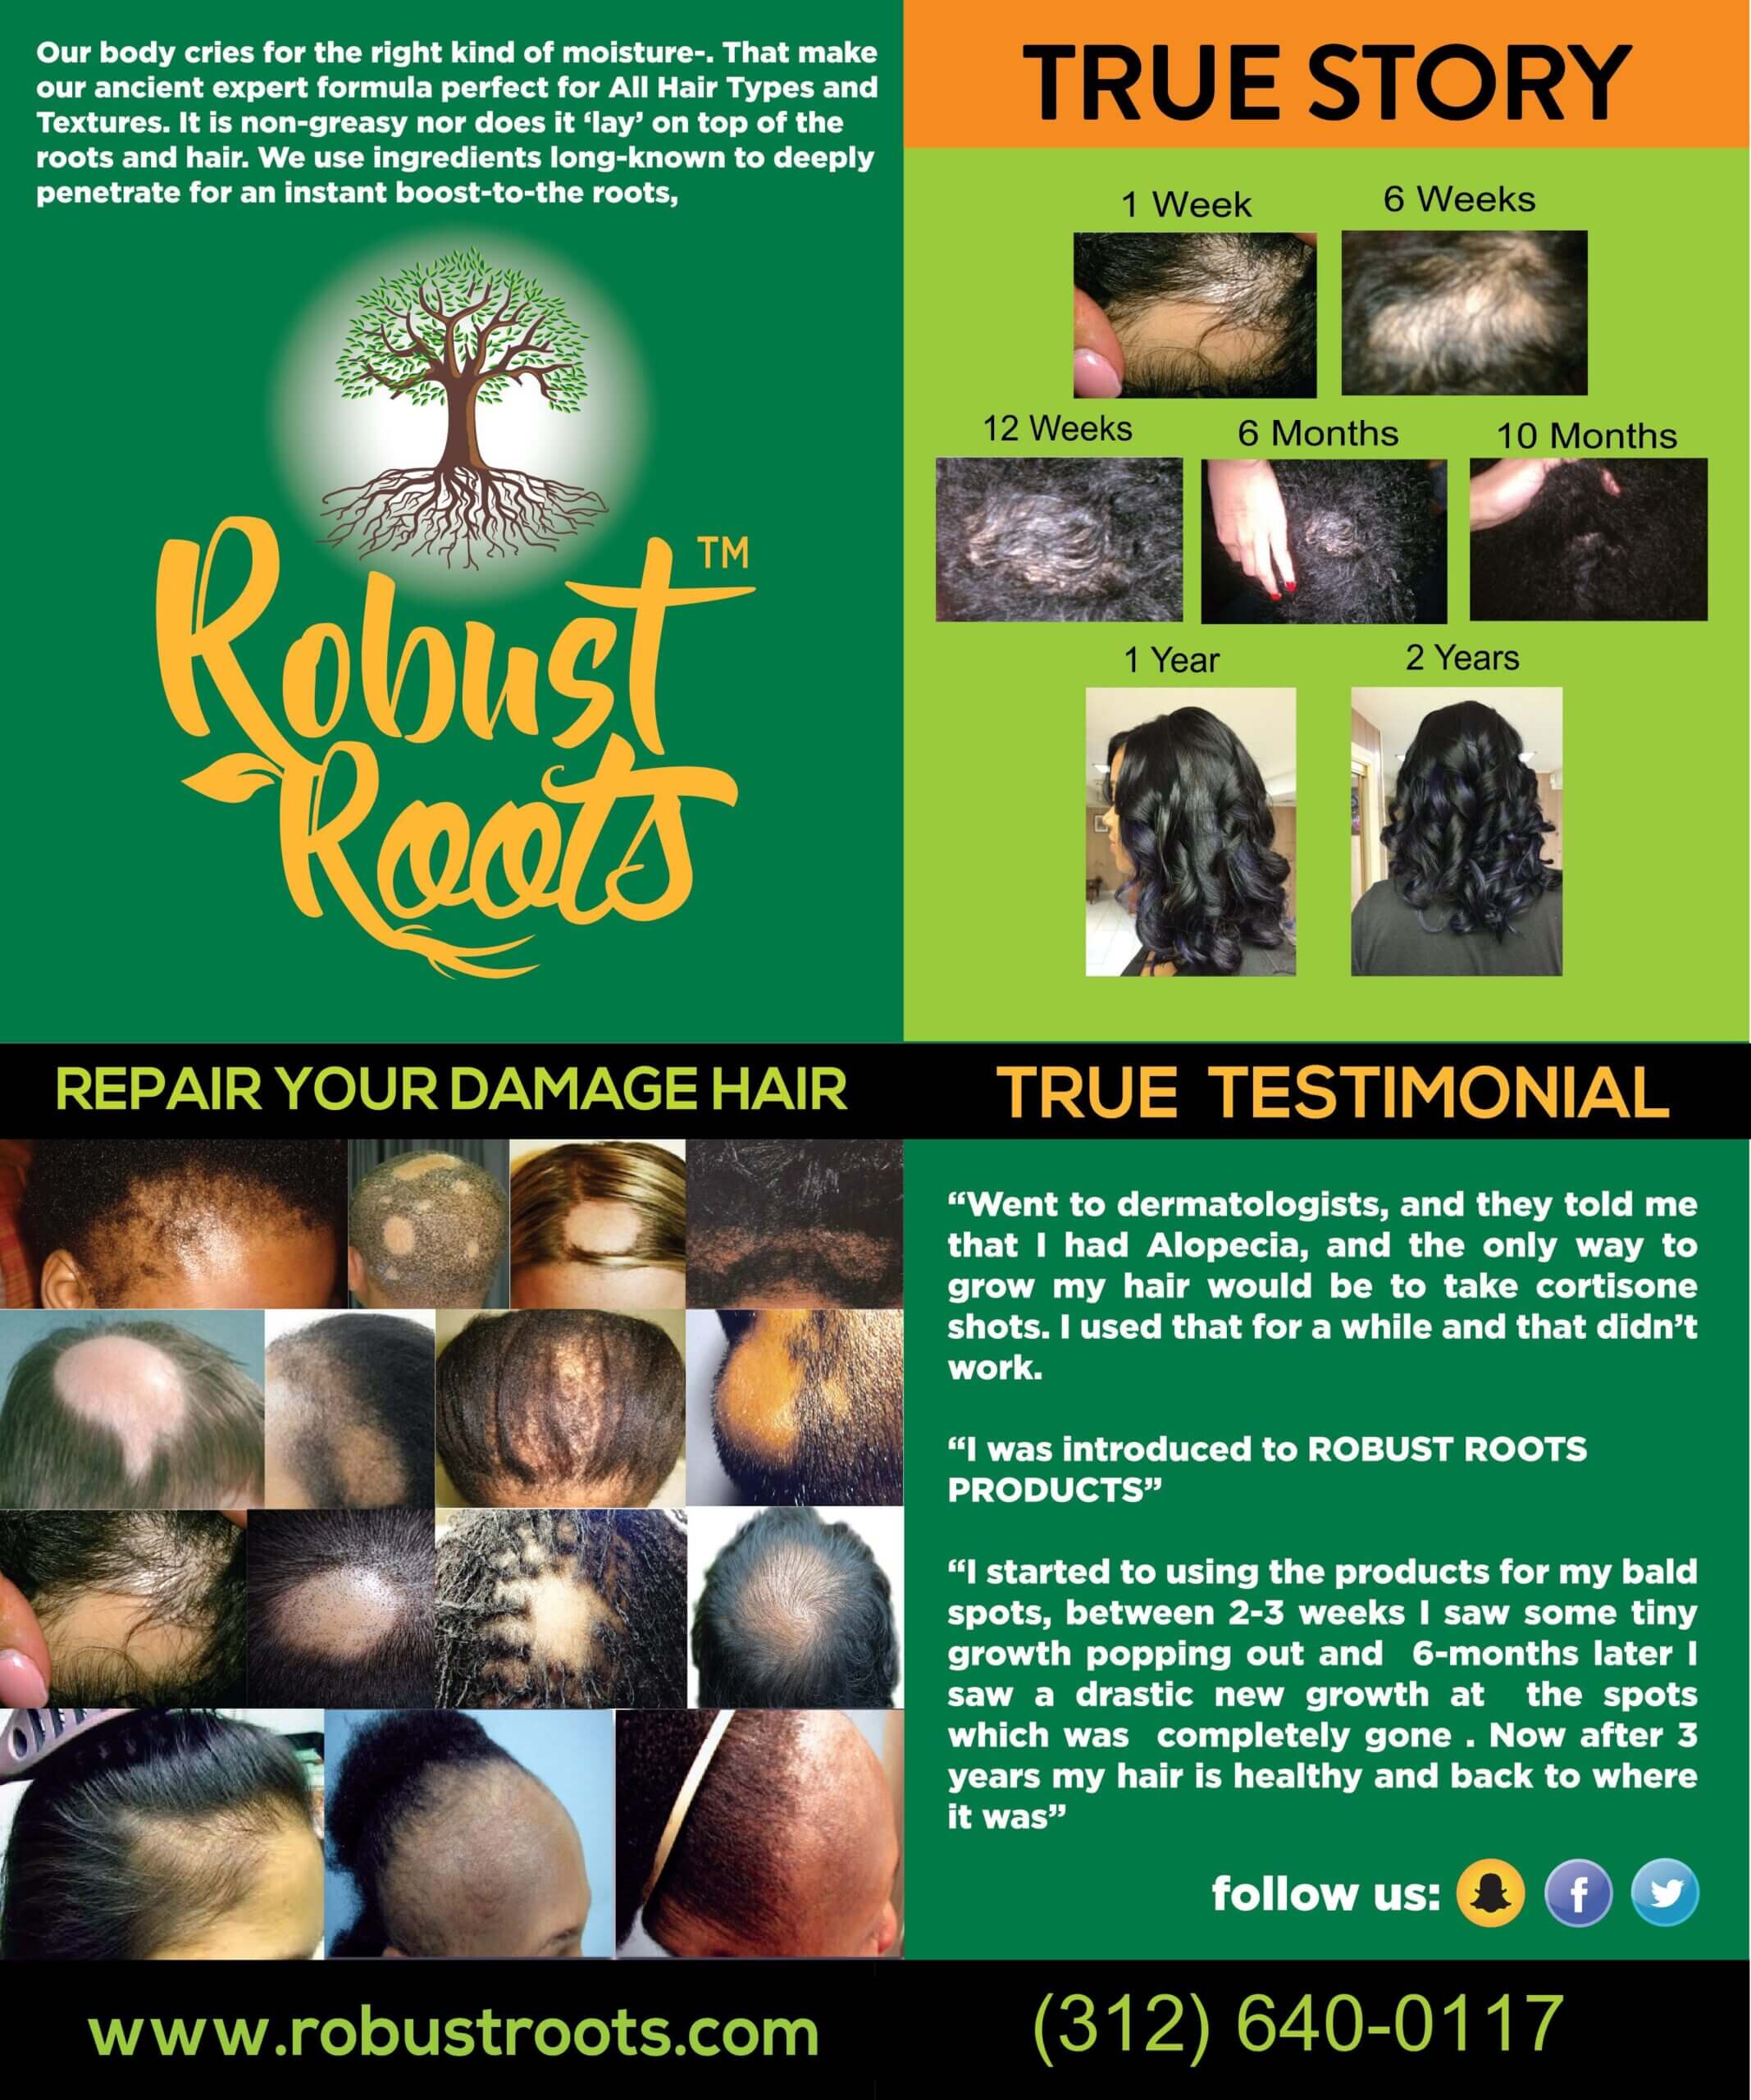 Promotional material for robust roots hair treatment products with before-and-after images showing hair growth progress over time.